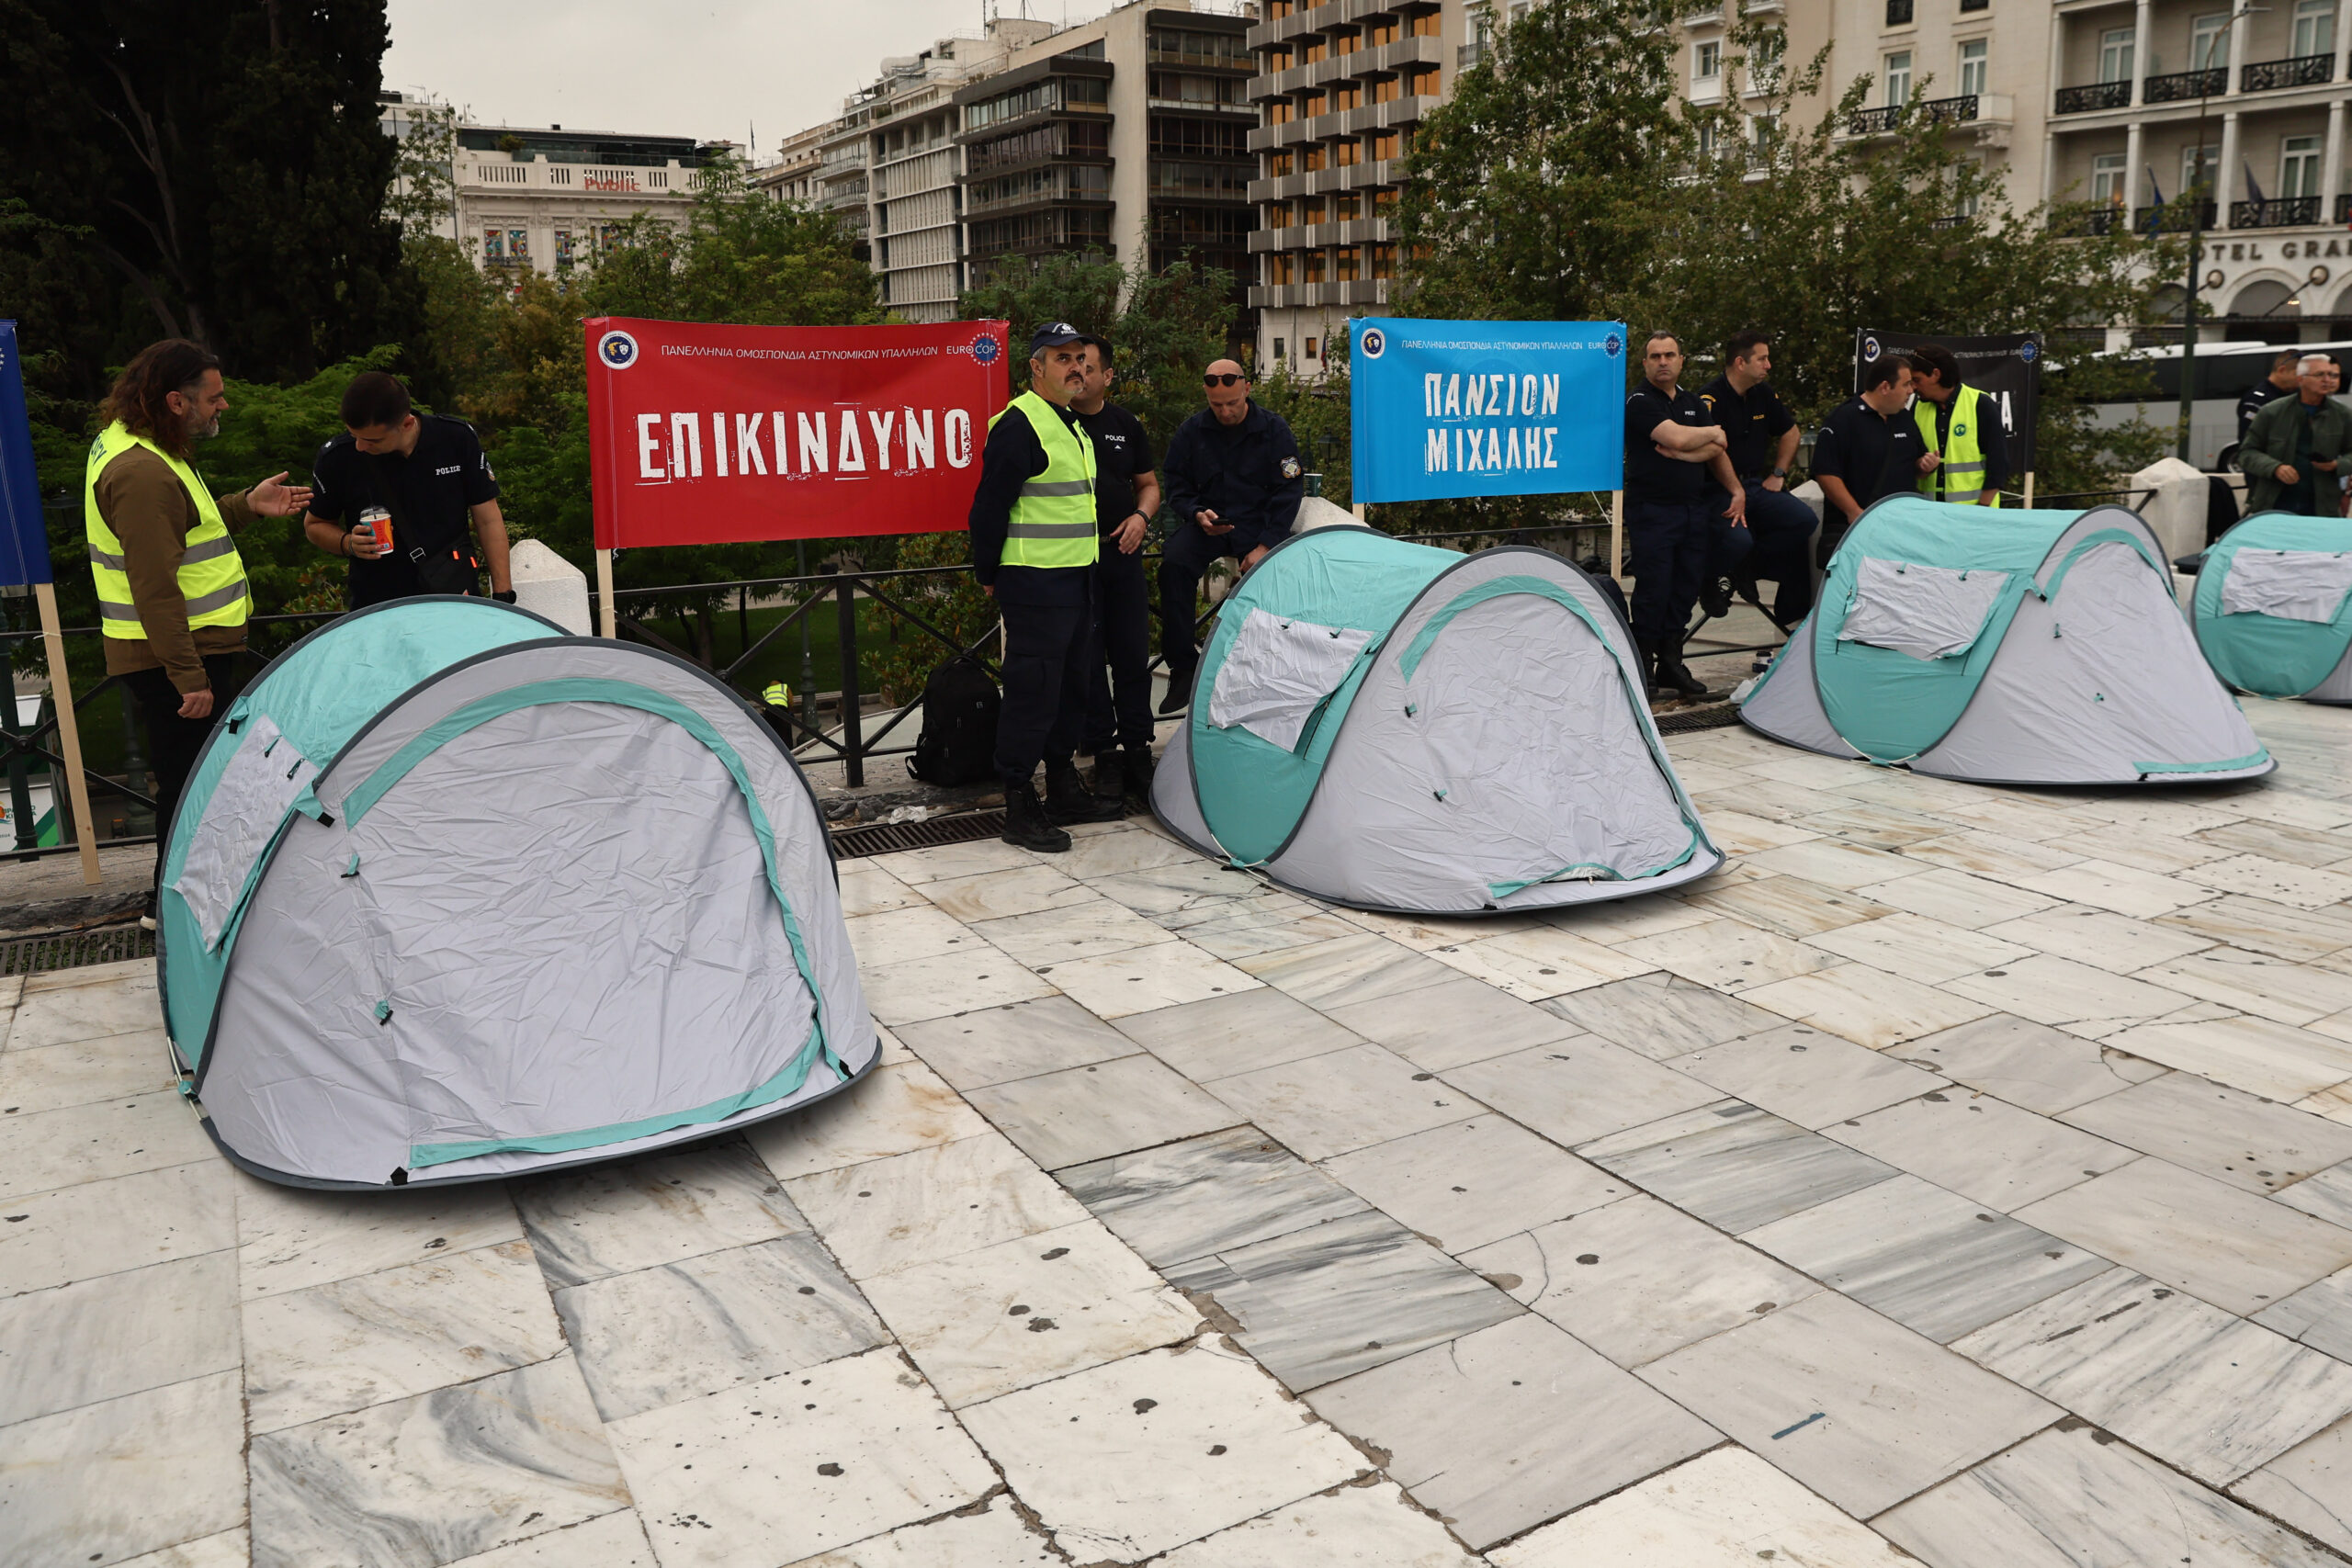 Police officers set up tents in Syntagma Square, protest budget cuts image